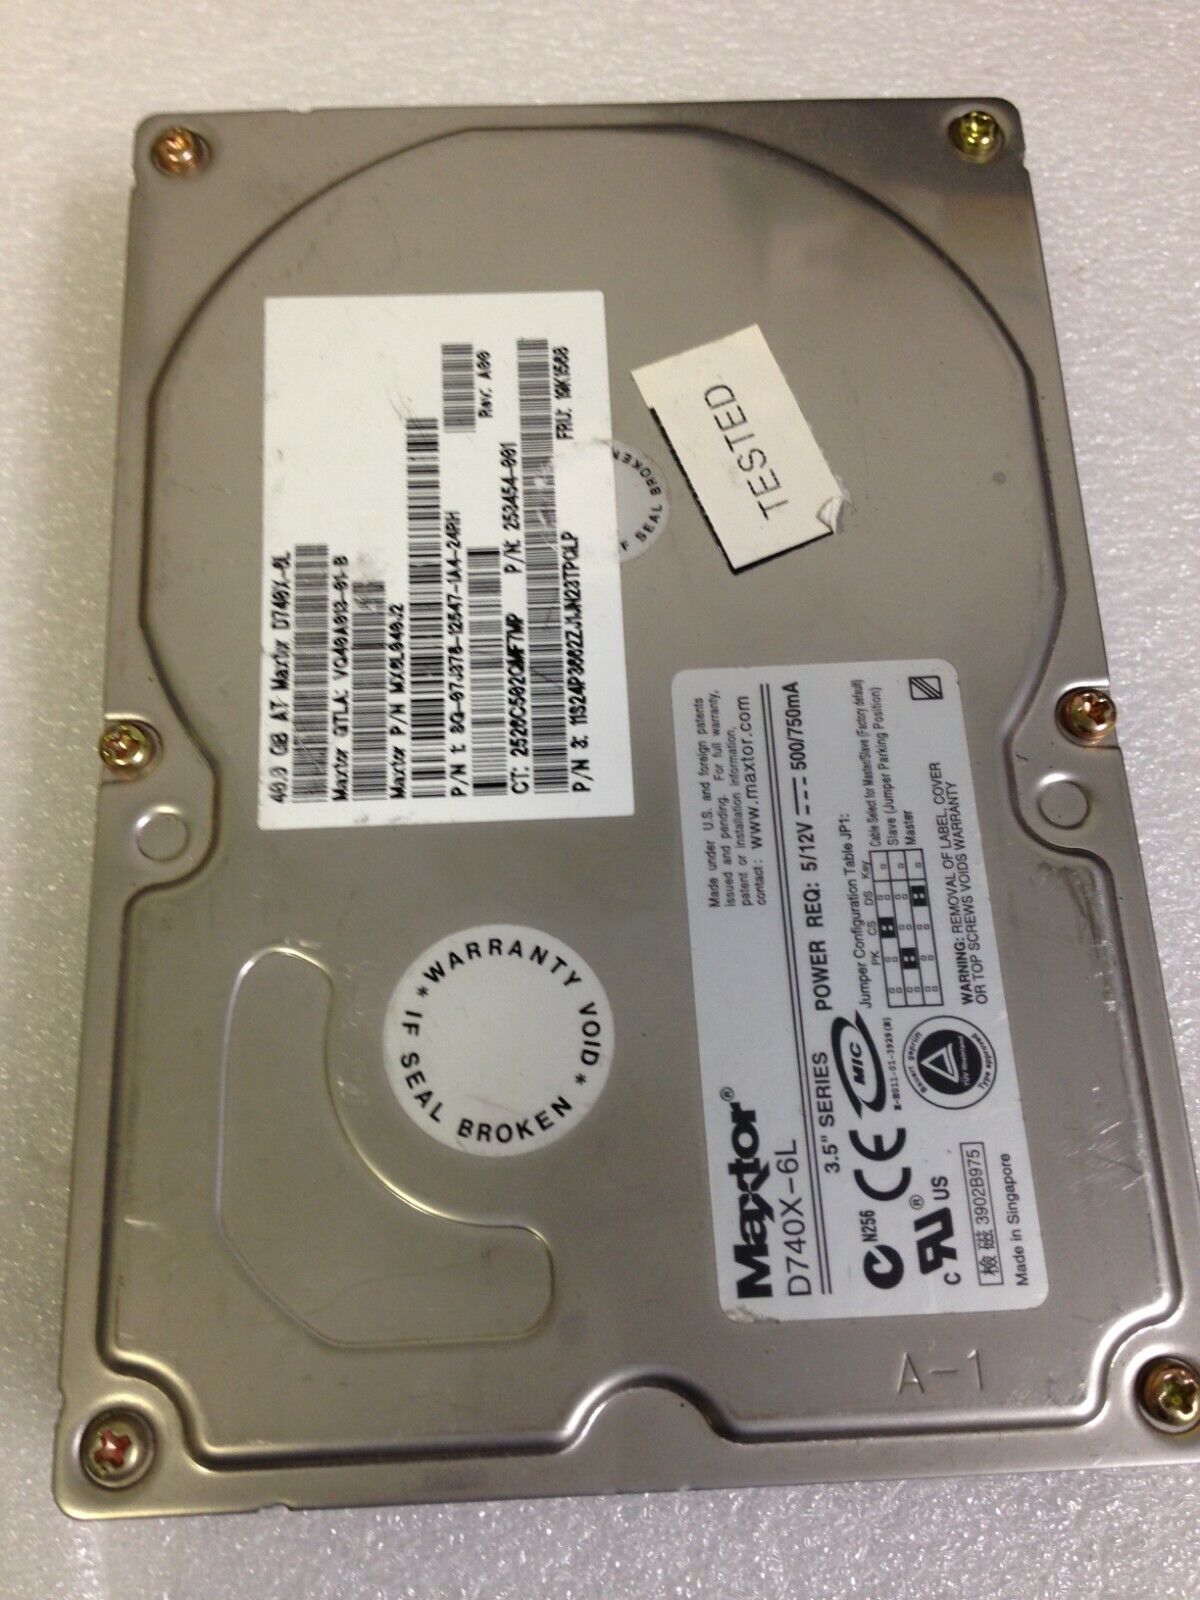 Maxtor IBM 19K1568 D740X-6L MX6L040J2 40GB 7200 RPM IDE Hard Drive TESTED